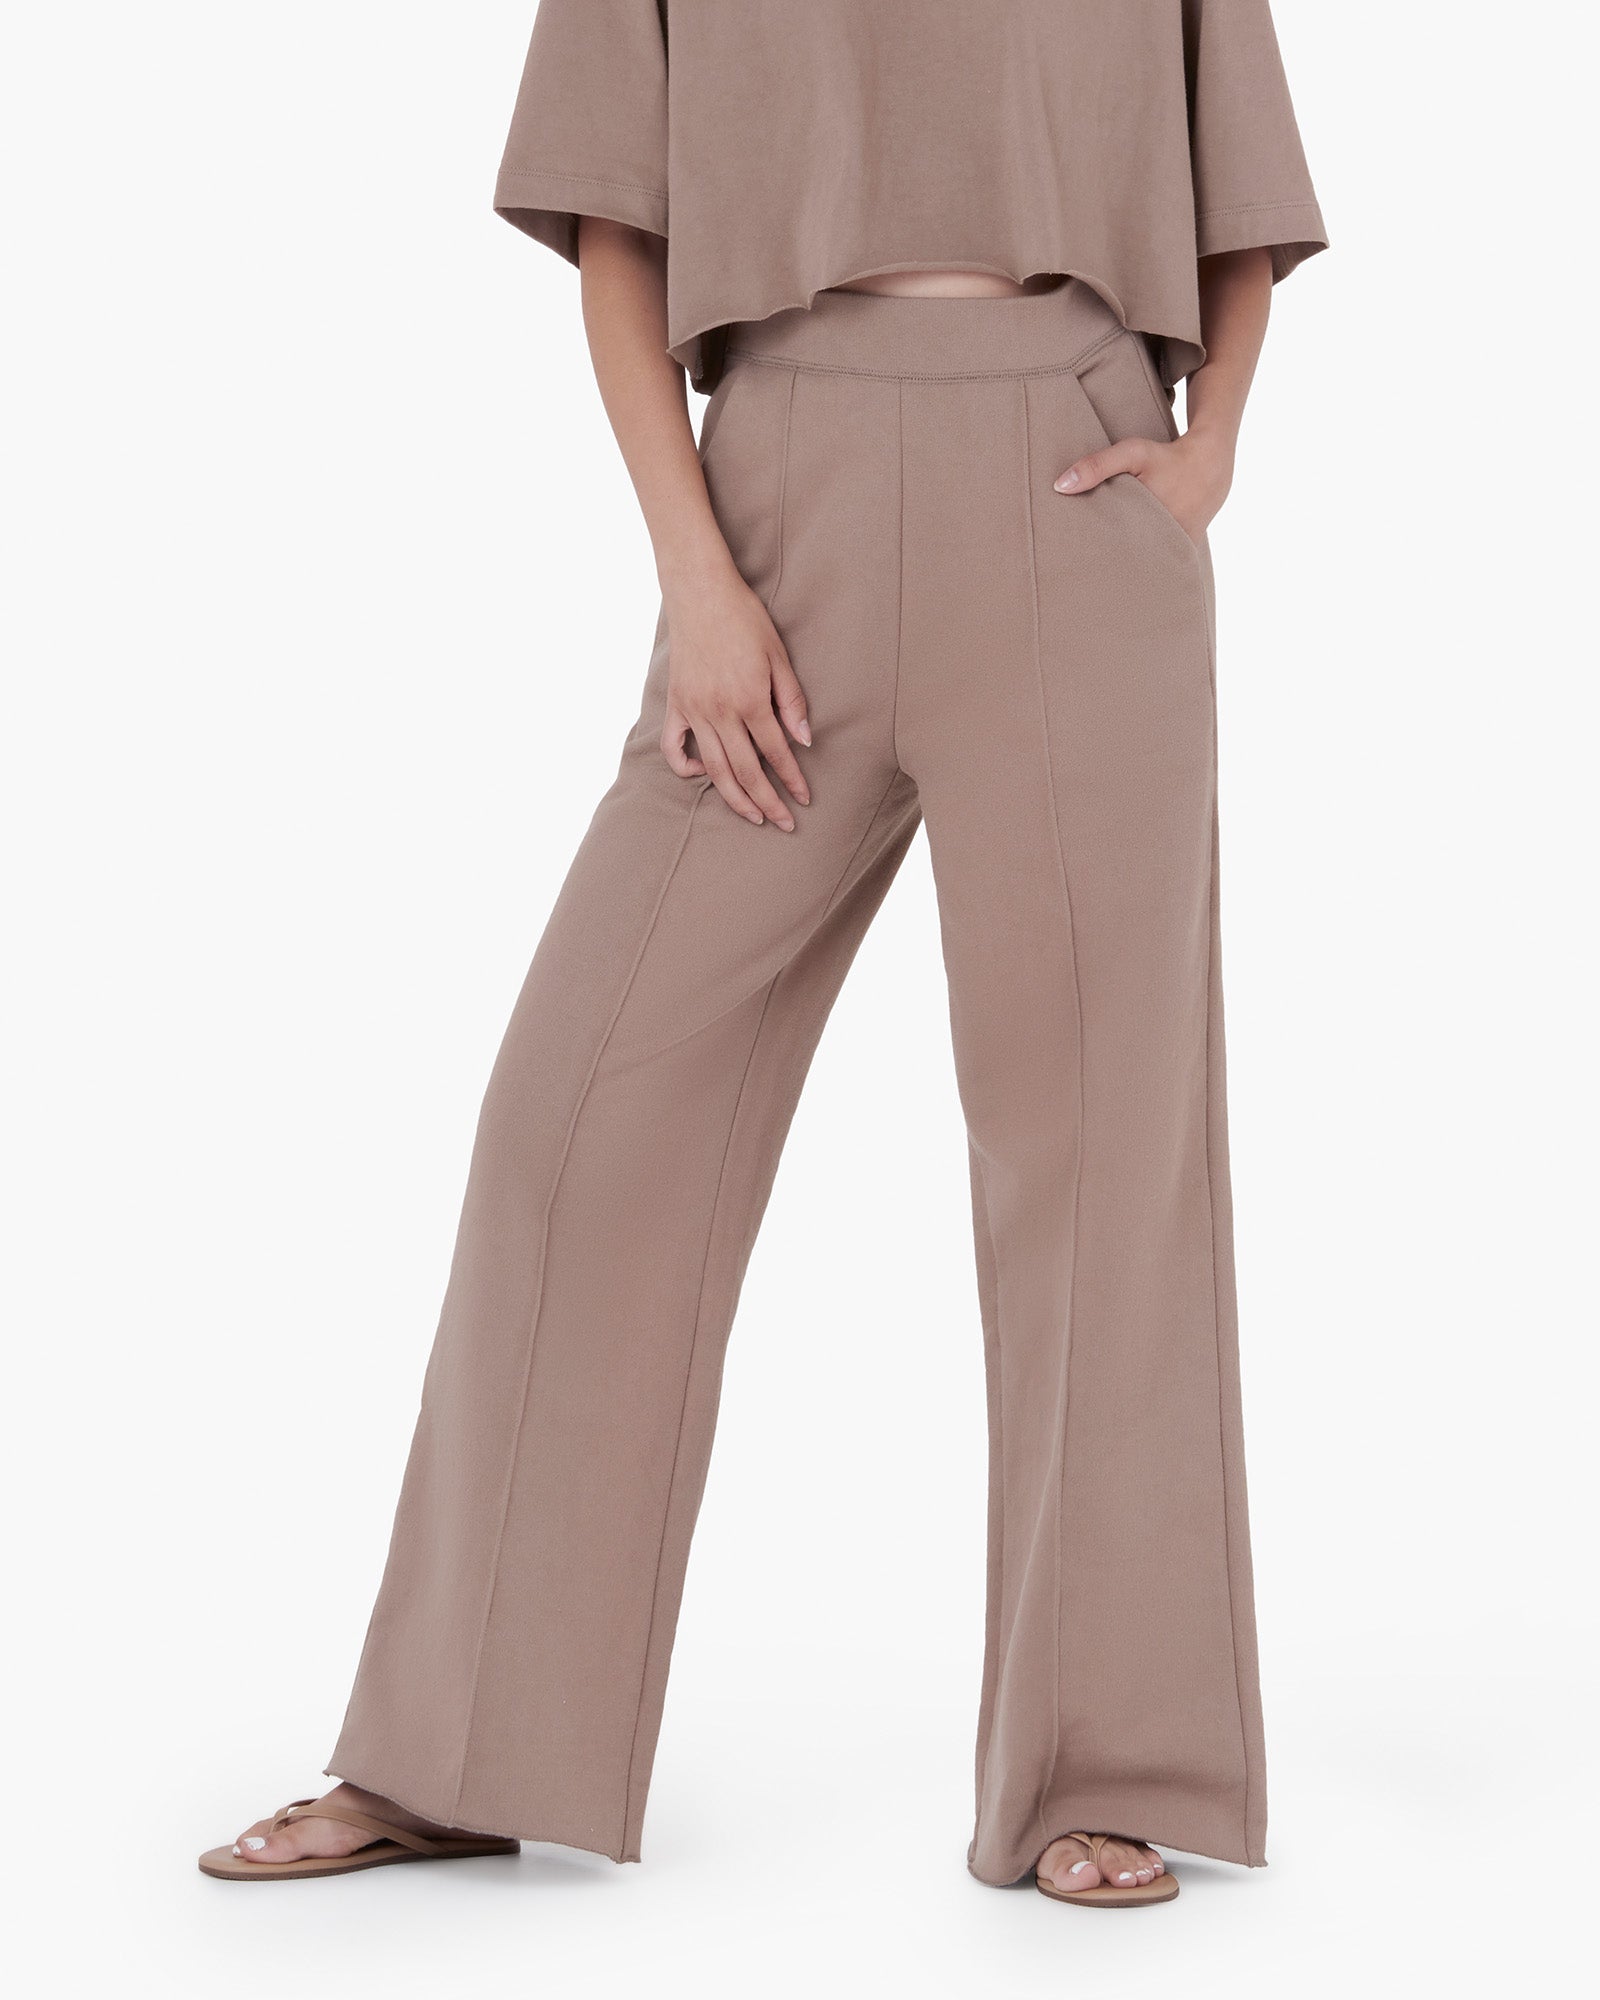 Grey Women's's's's's's's's's's's's's's's's's's's's's's TKEES Raw Edge Wide Leg Pants | OXTKFD528